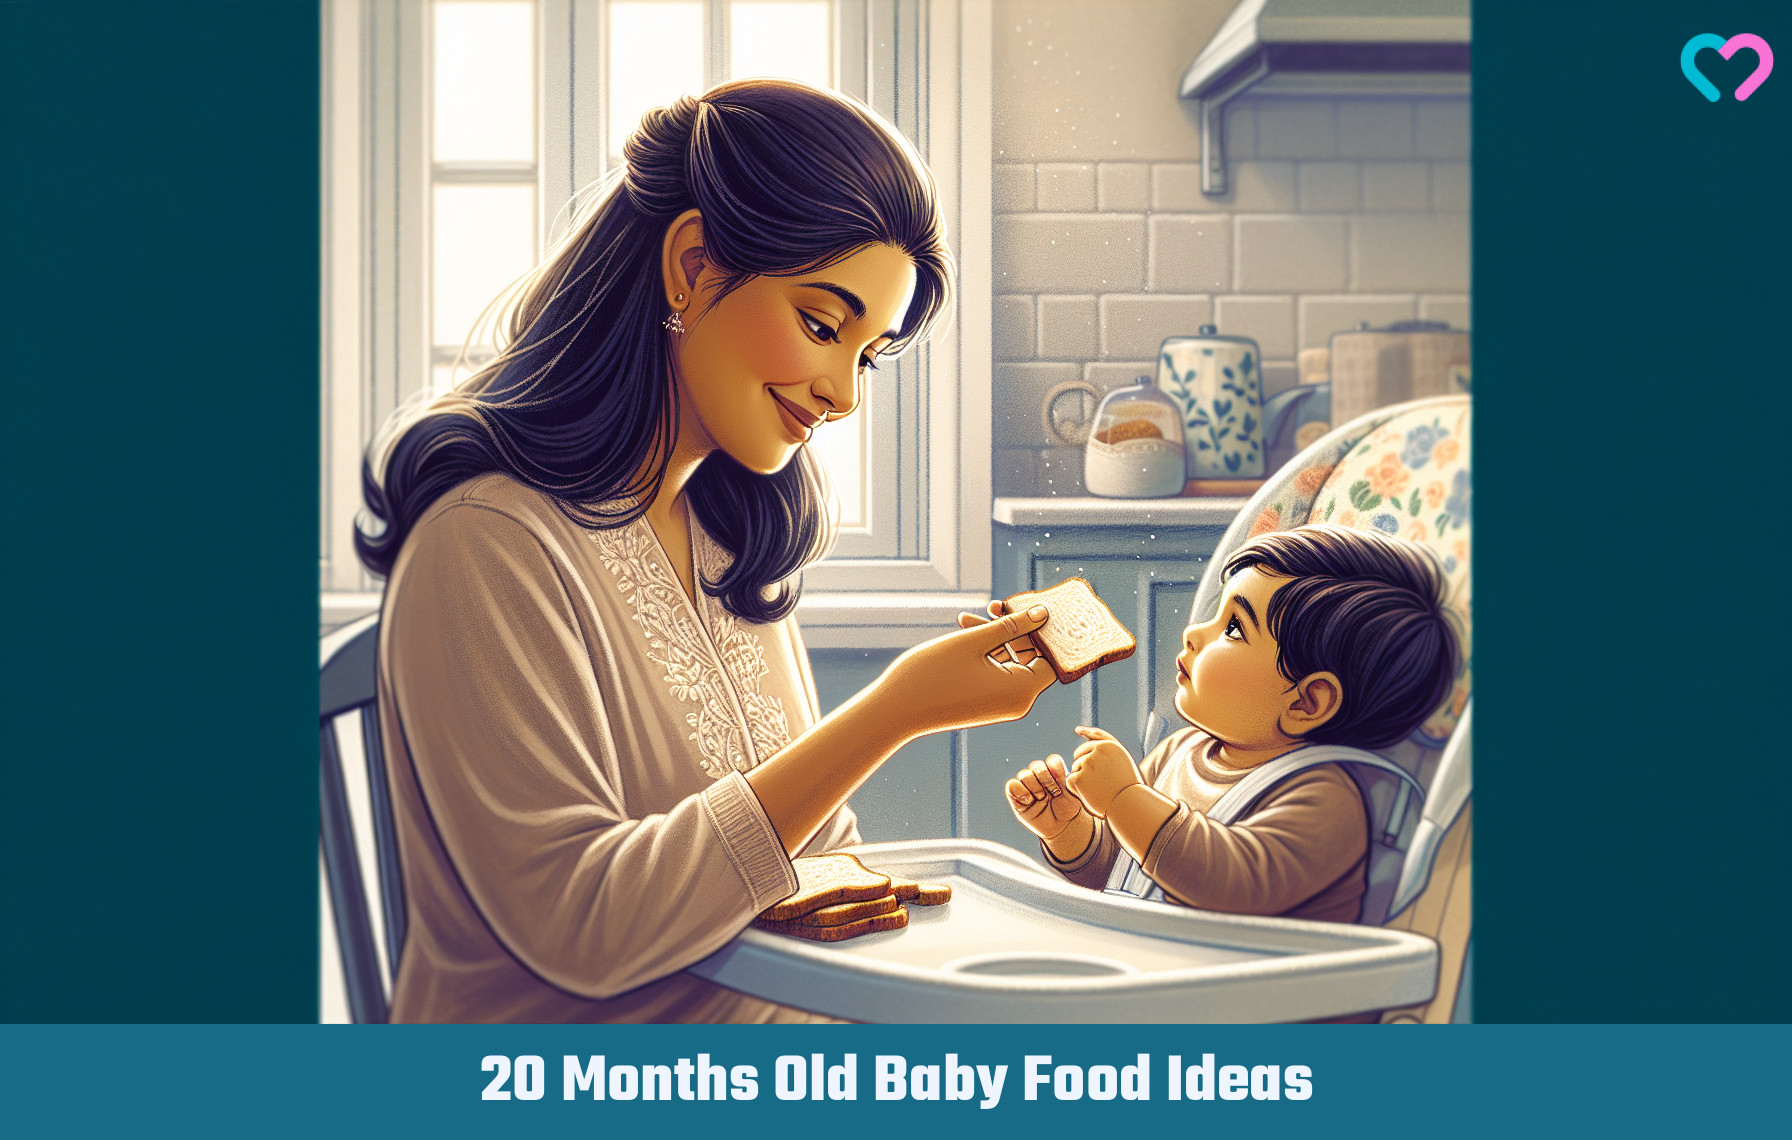 20 Months Old Baby Food Ideas_illustration